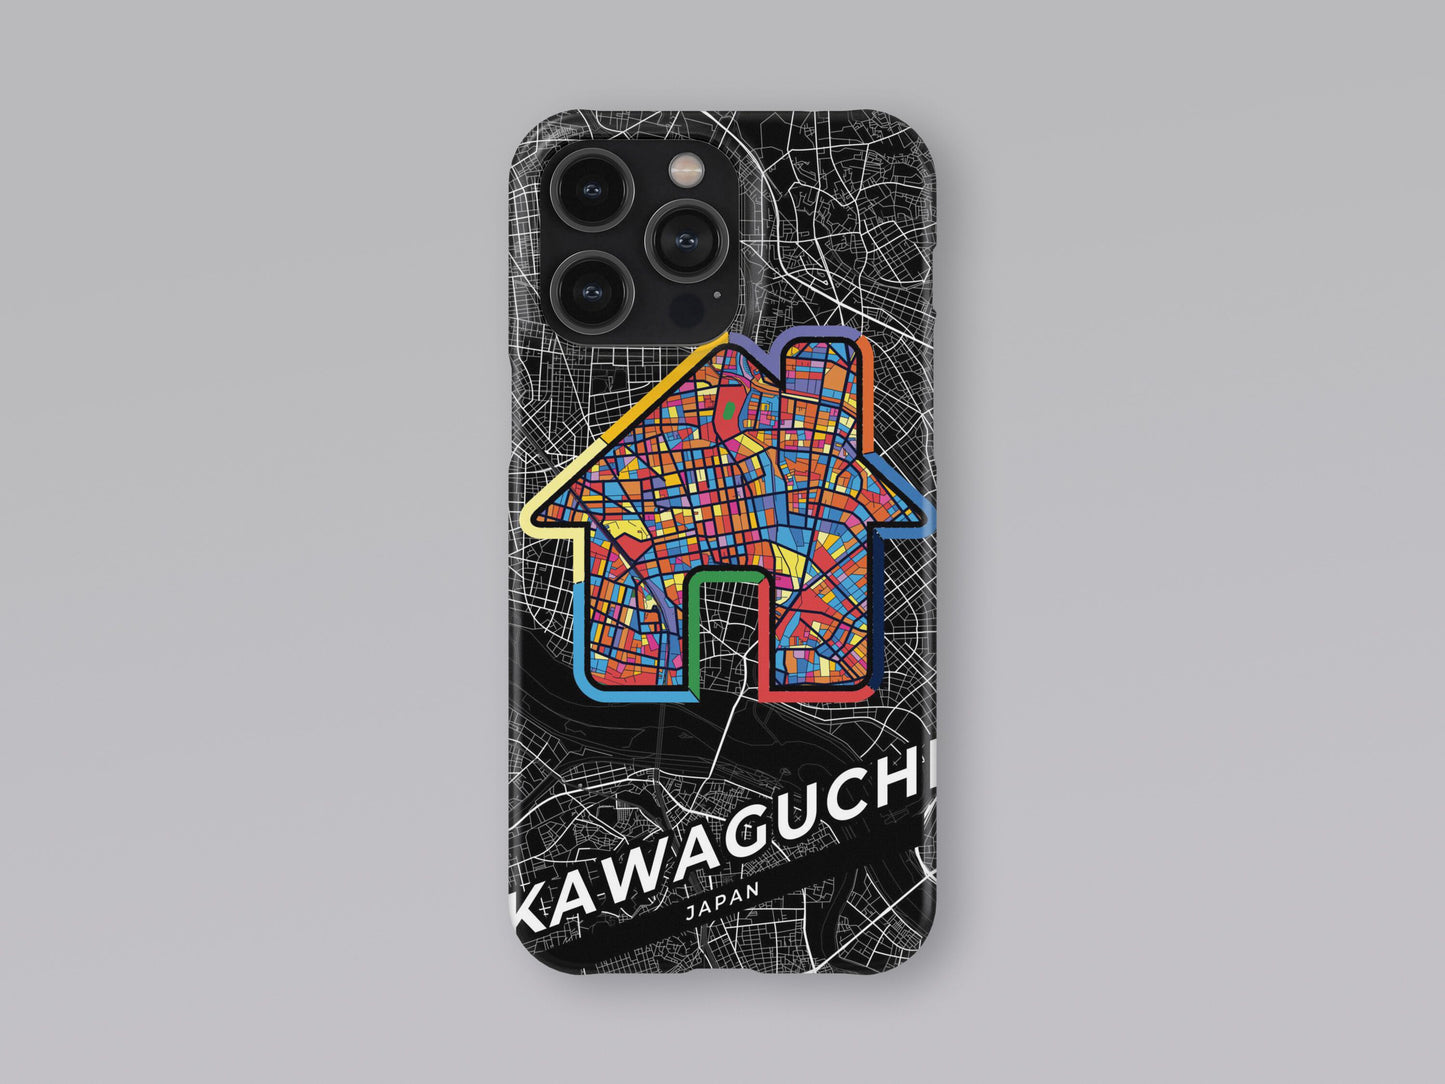 Kawaguchi Japan slim phone case with colorful icon. Birthday, wedding or housewarming gift. Couple match cases. 3